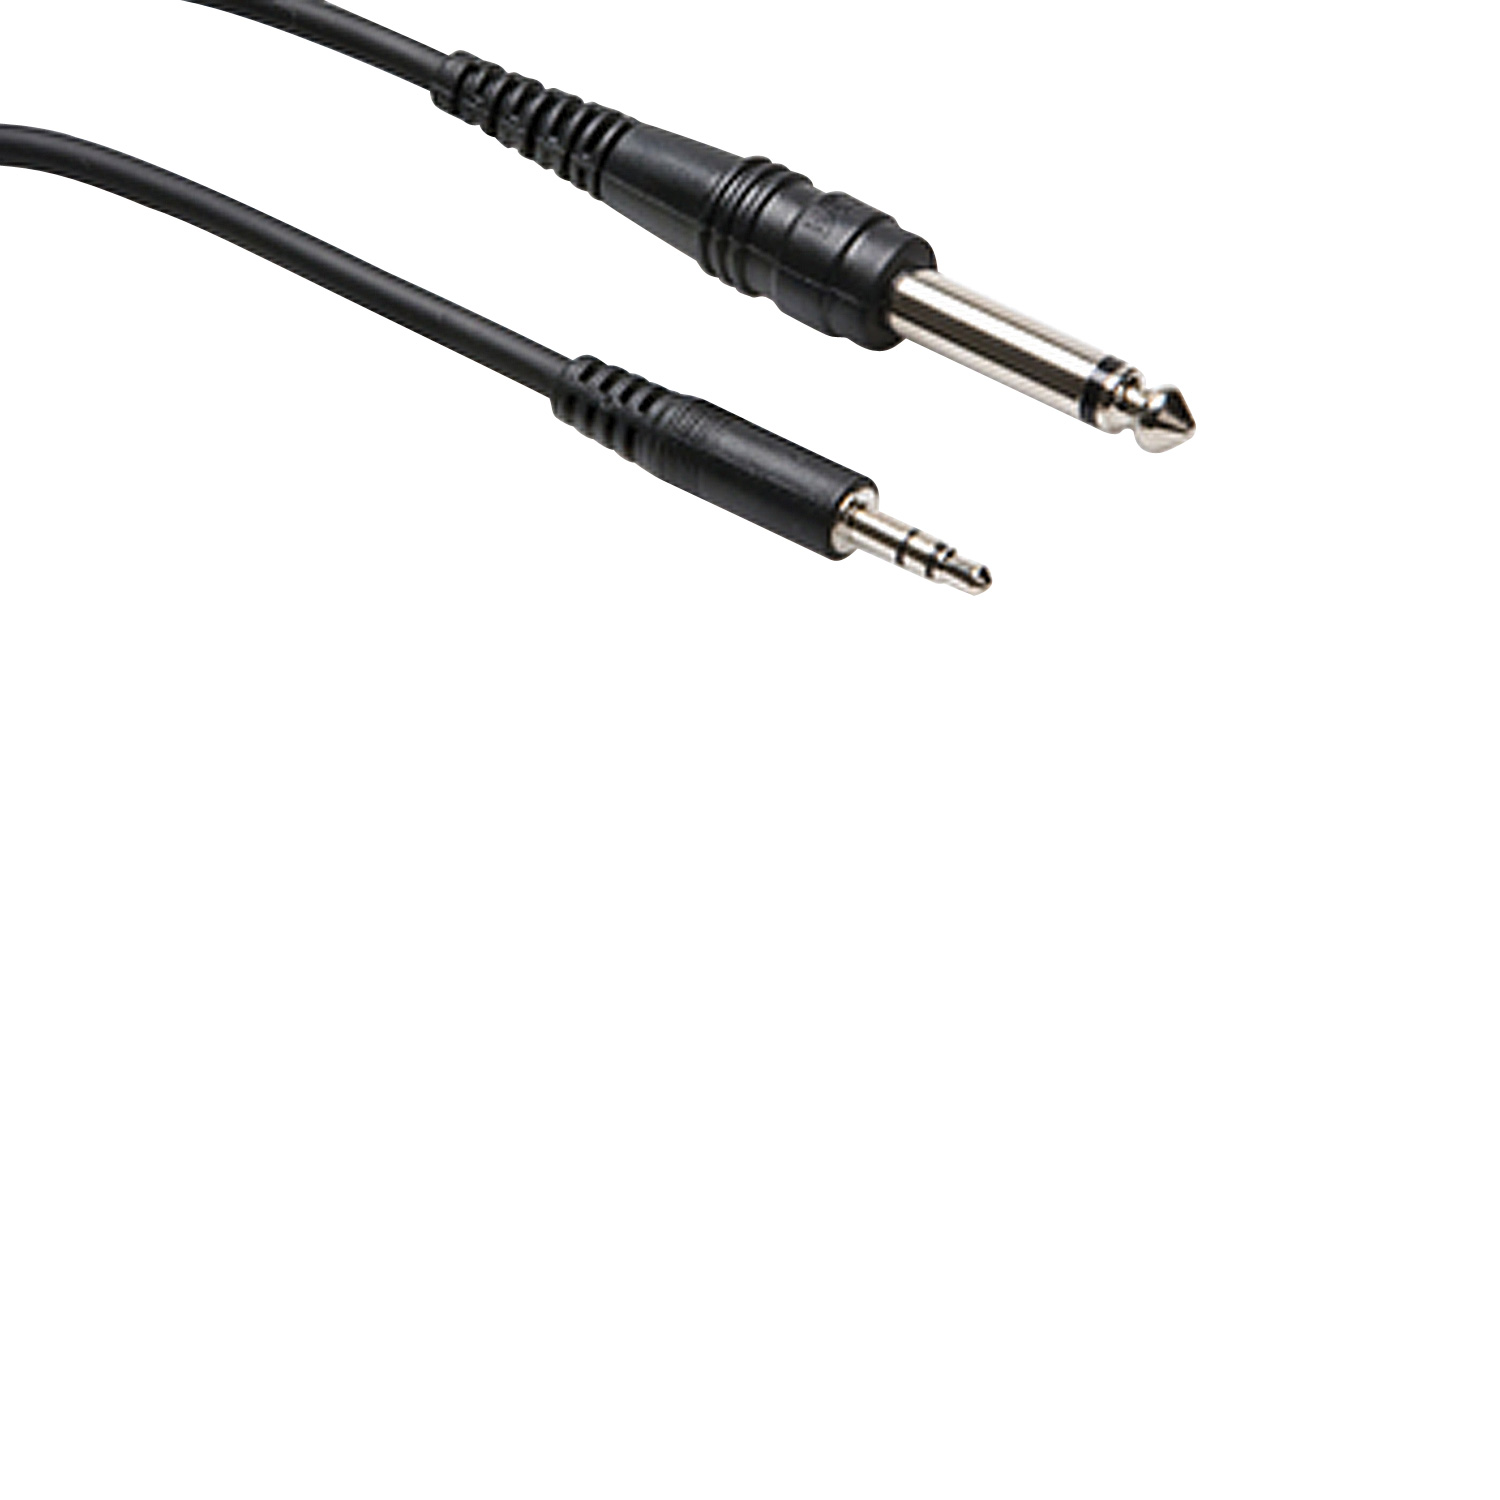 5′ Stereo Mini to ¼” Phono Cable (to connect iPod®, MP3 player or laptop) 1